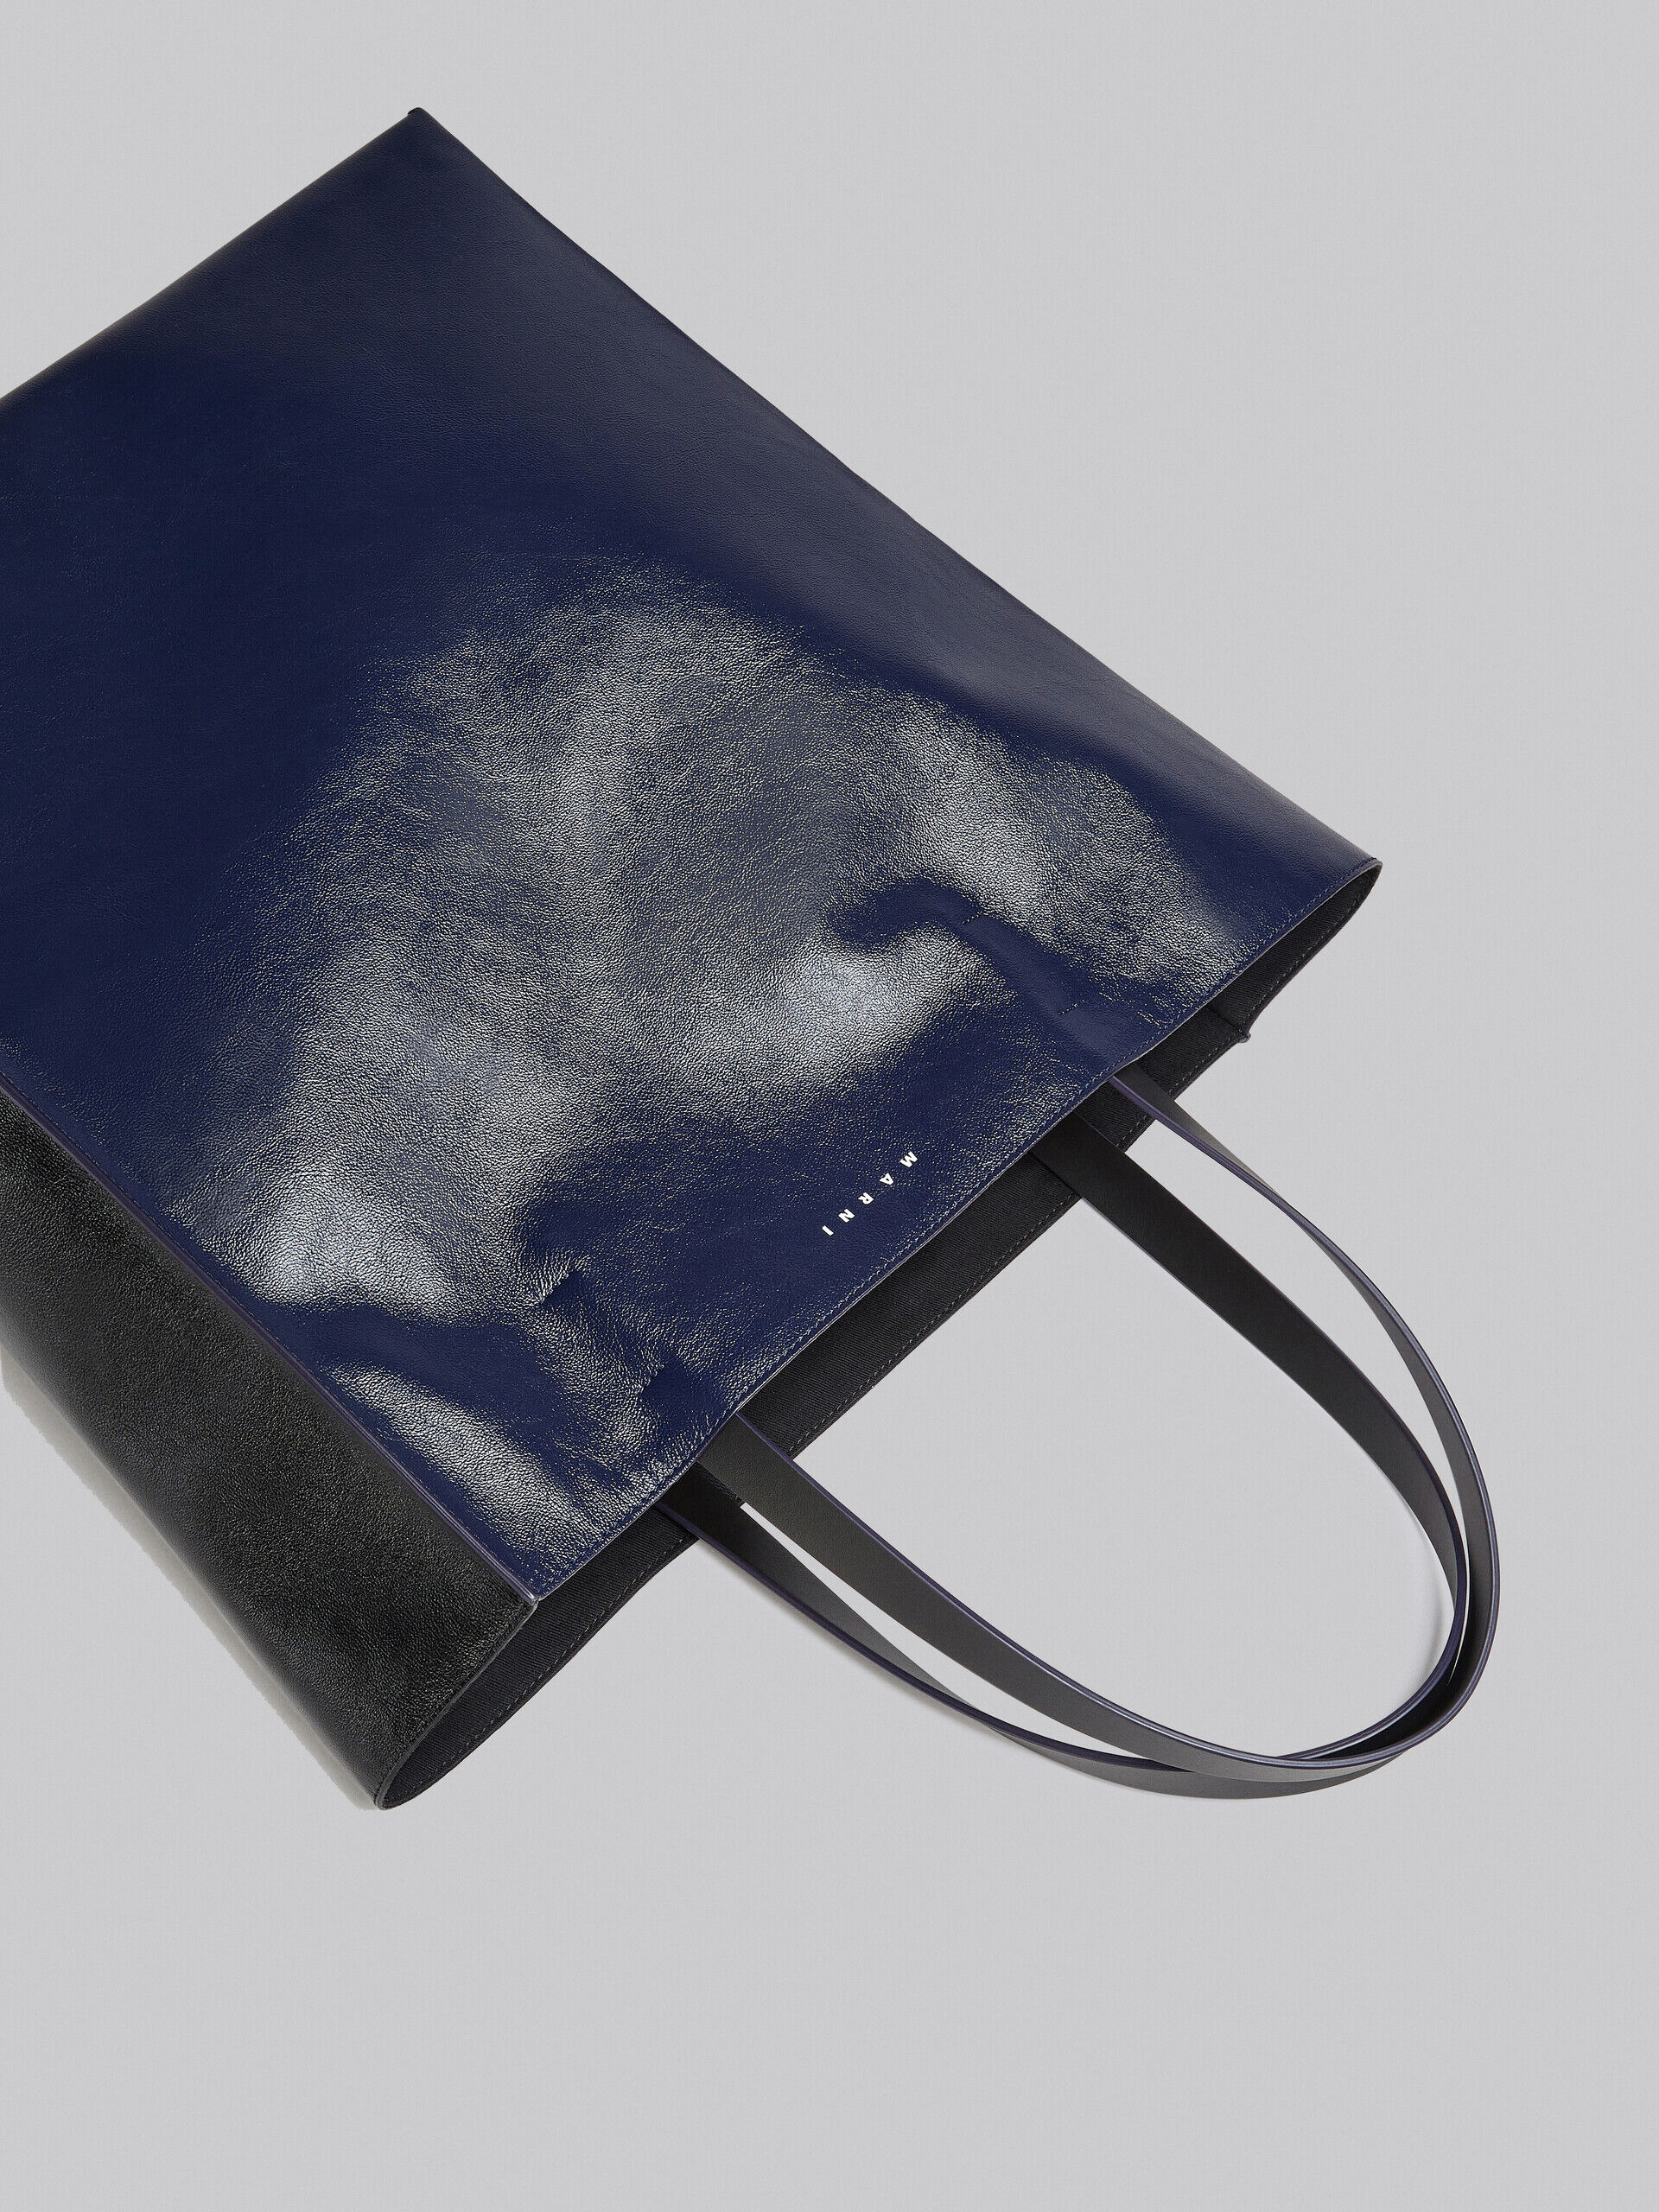 Museo Soft Large Bag in black and blue leather | Marni